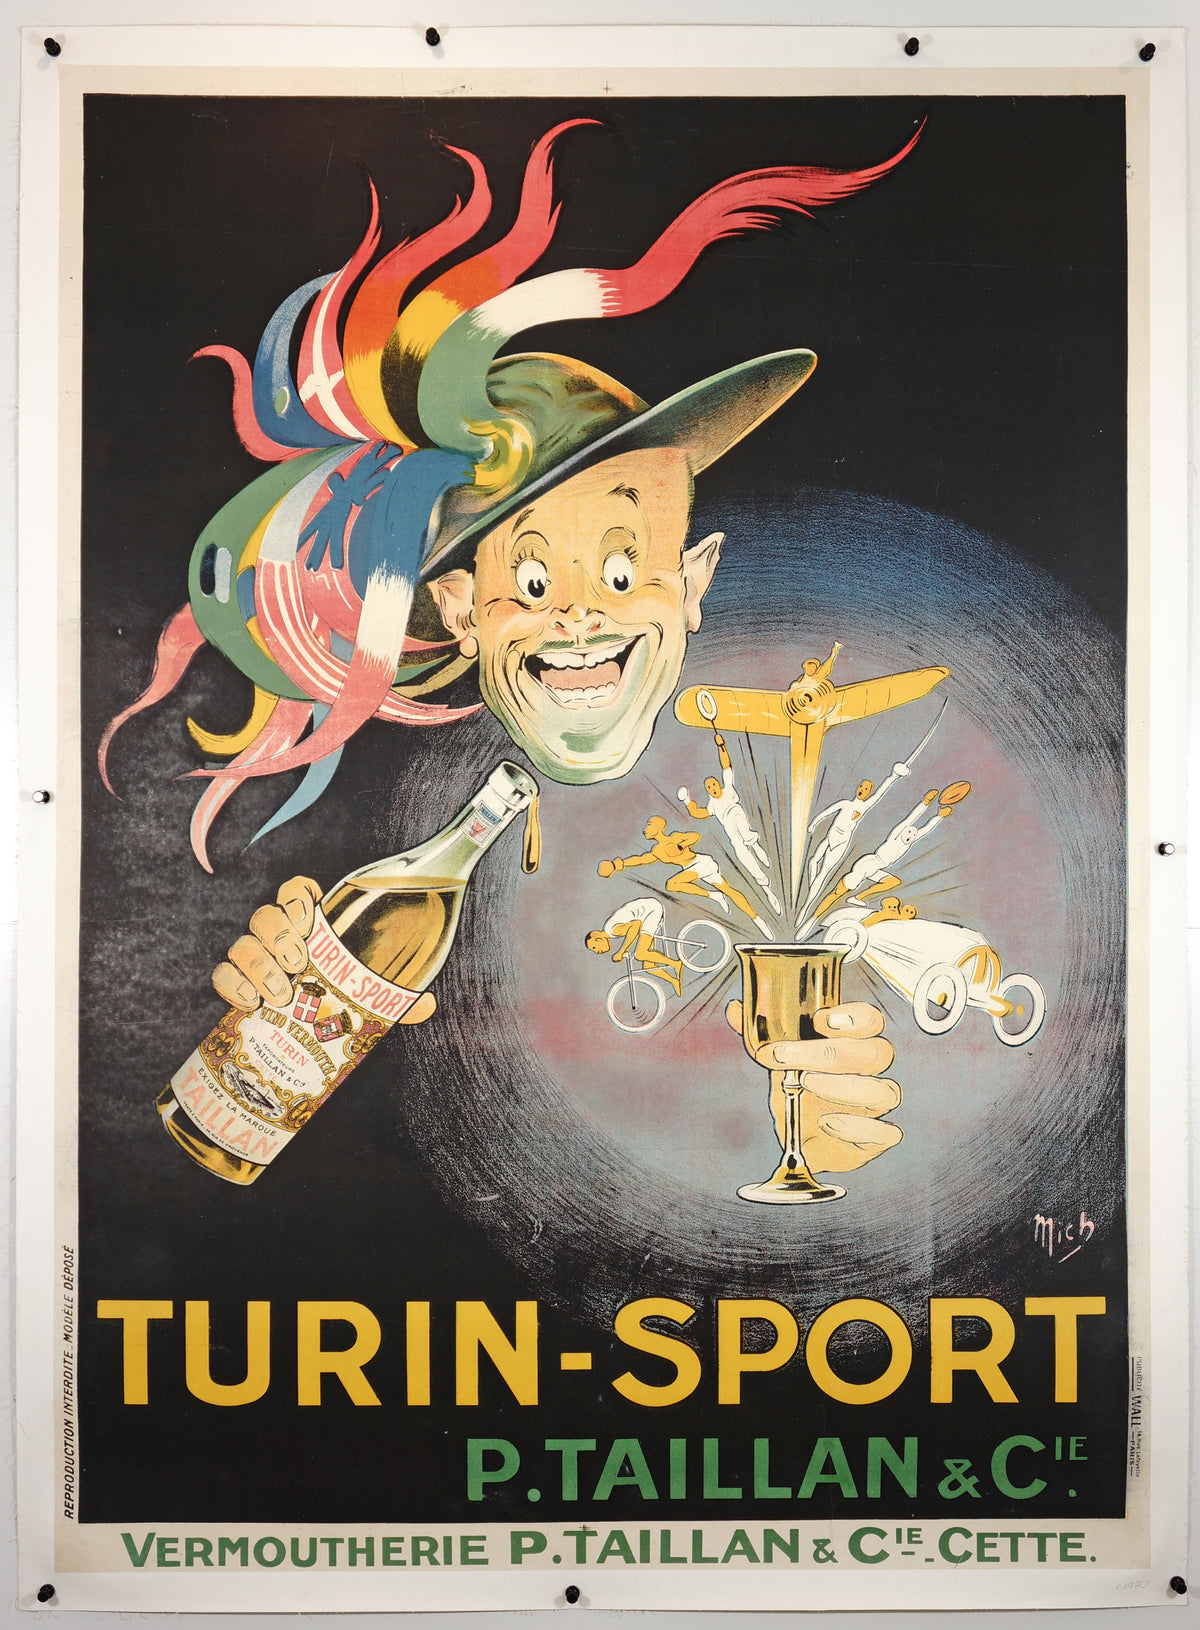 Turin Sport - Authentic Vintage Poster